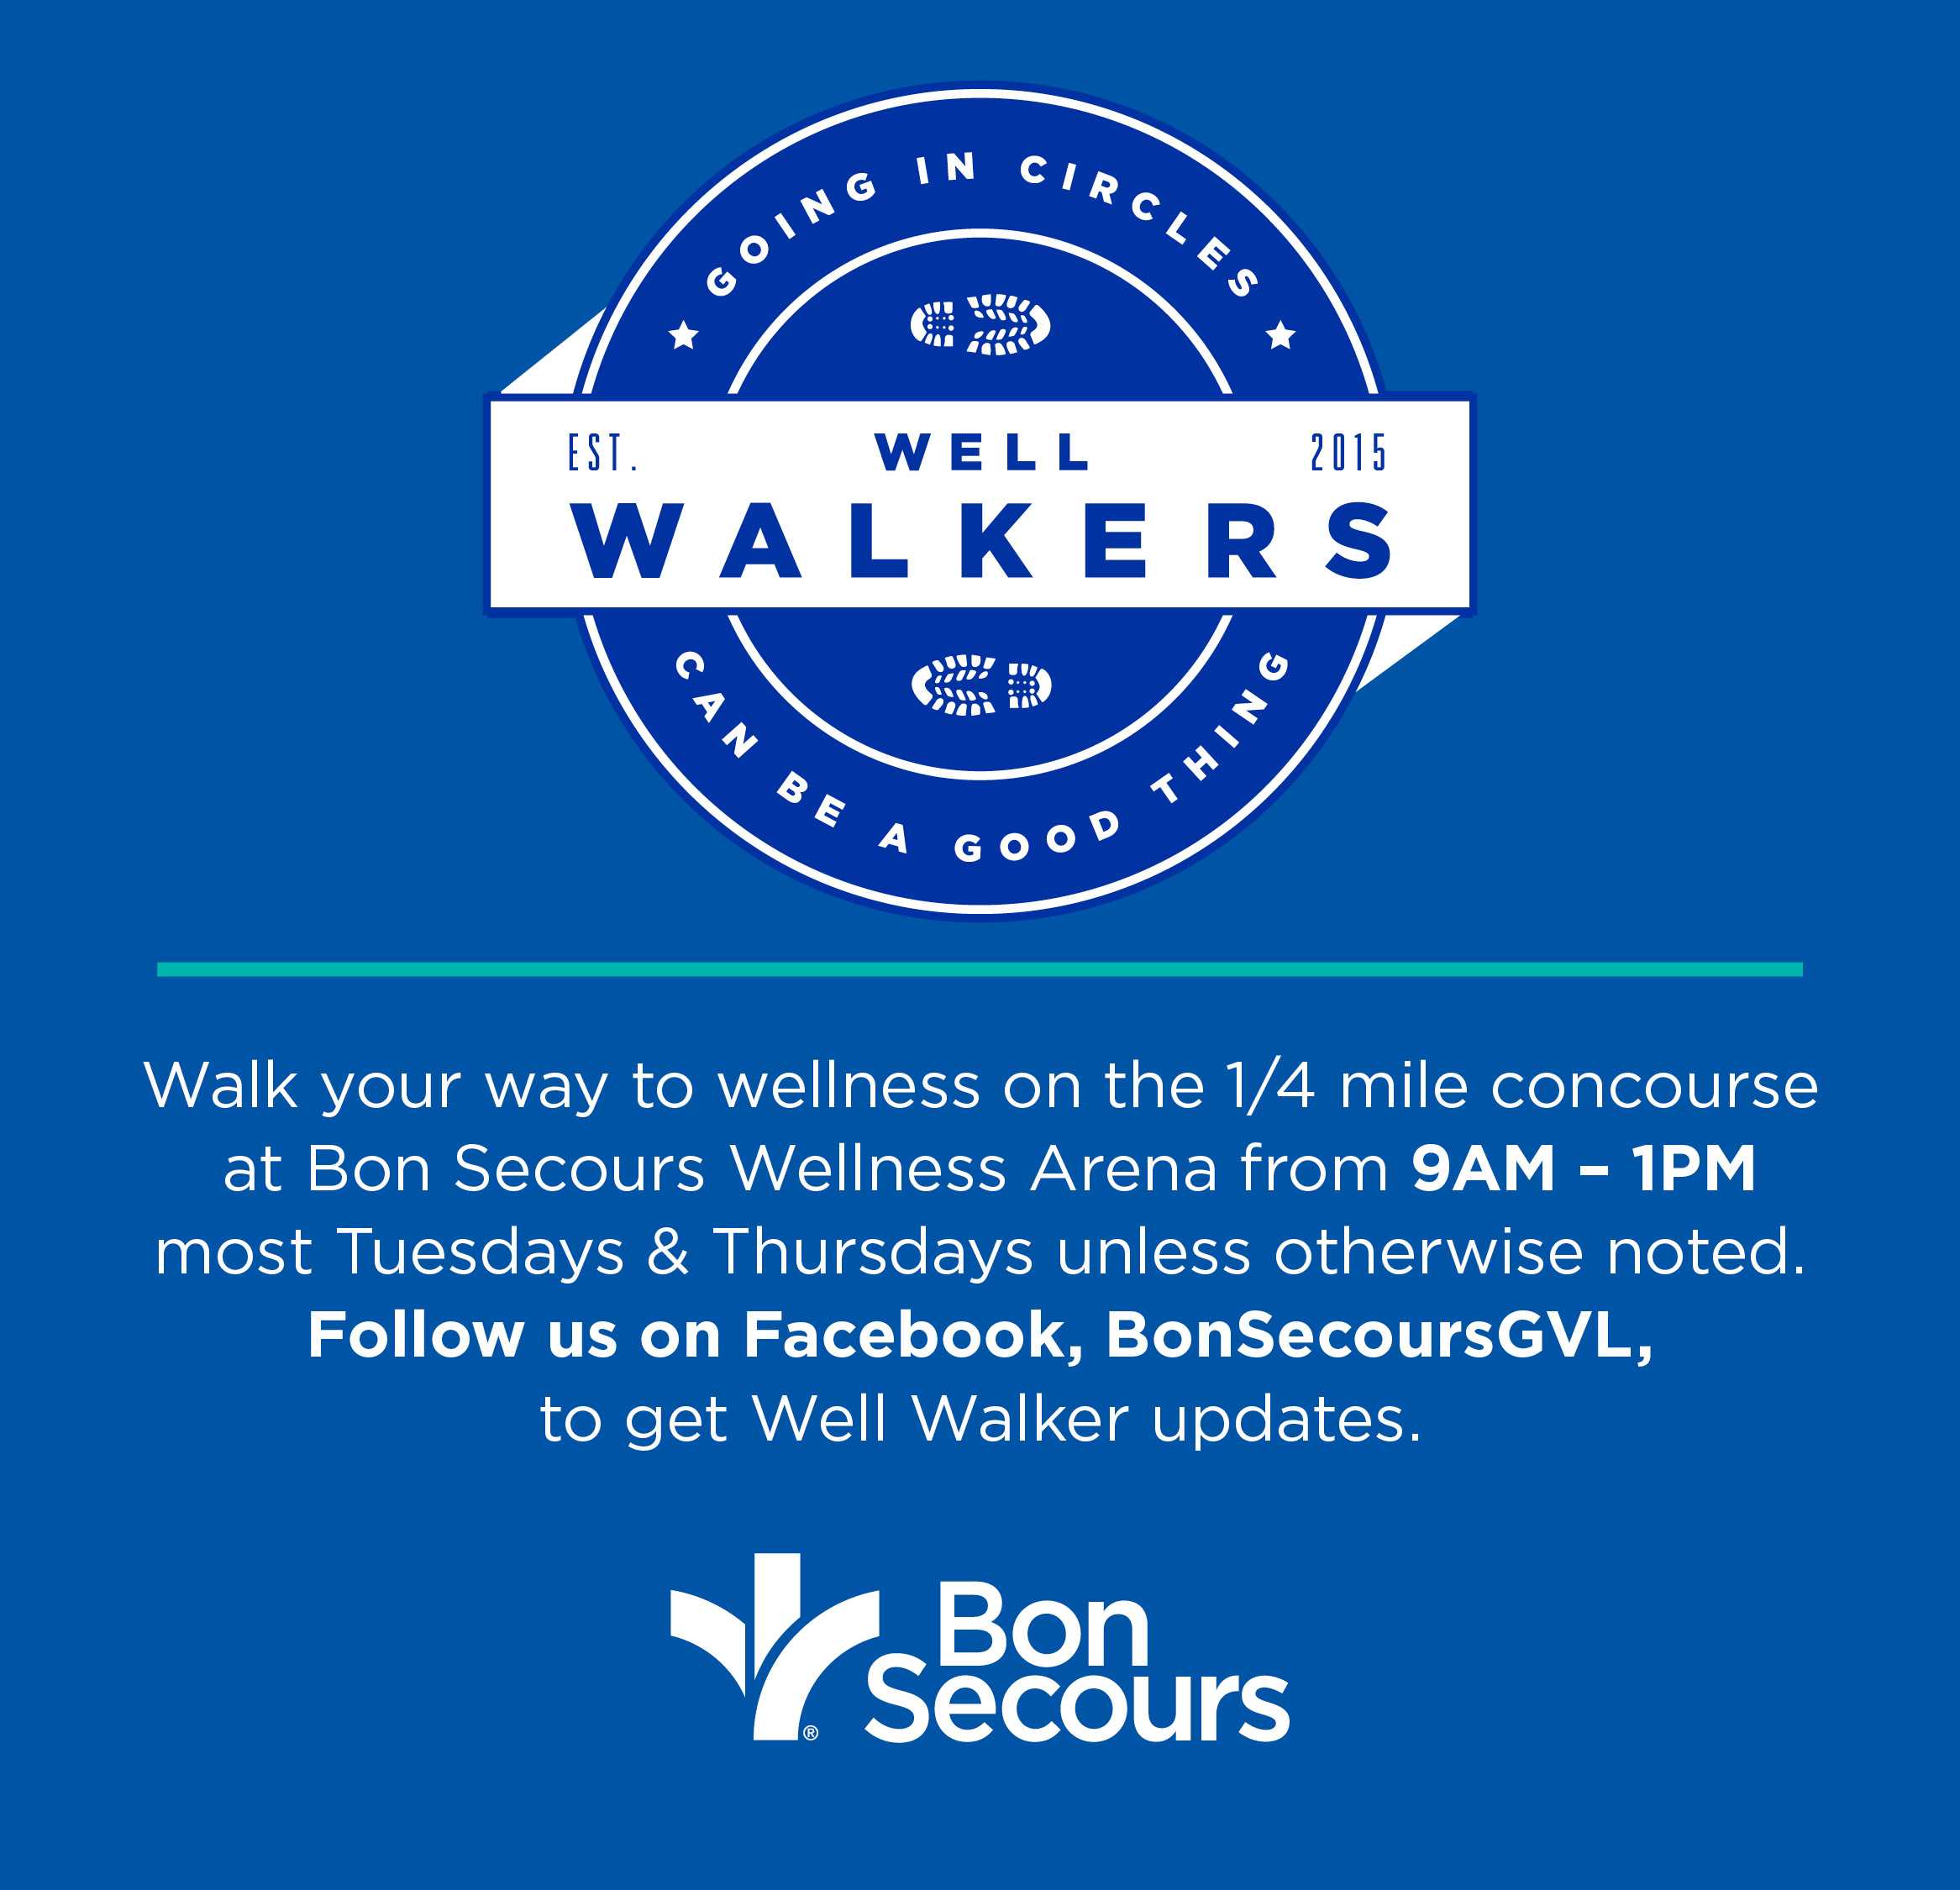 Milliken Publishing Company Worksheet Answers Along with Bon Secours Wellness arena